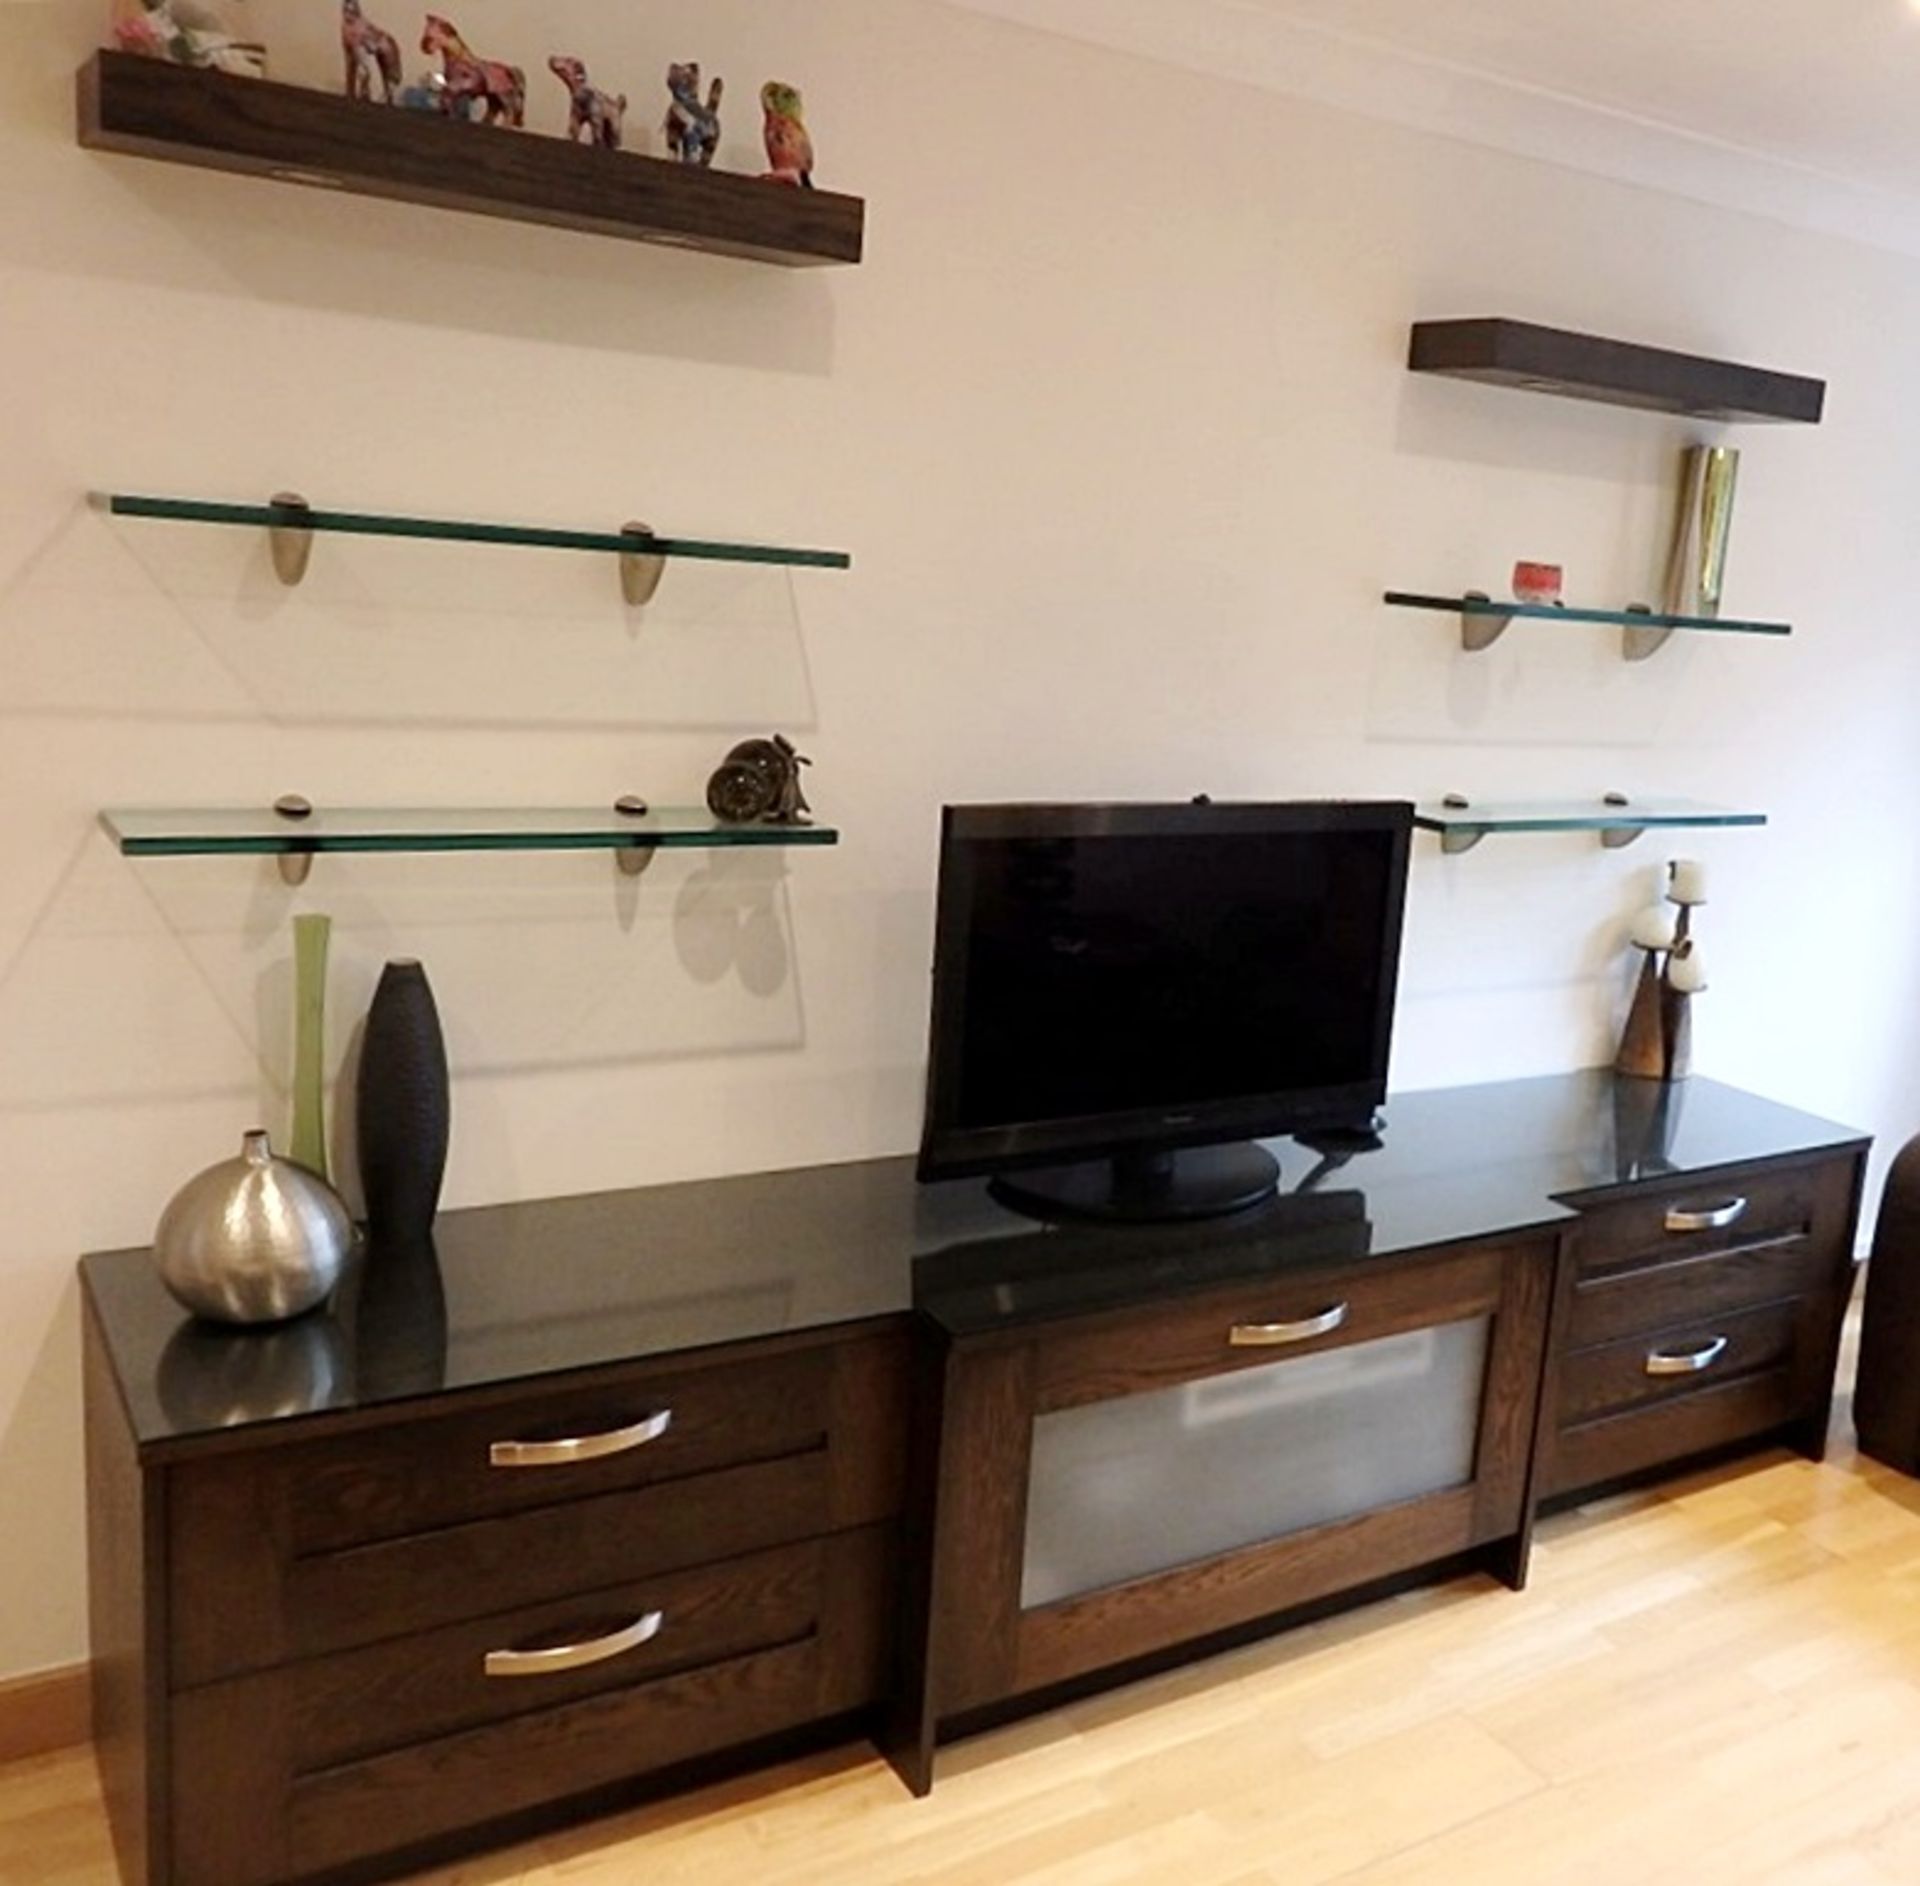 1 x Earle and Ginger Wenge Wood TV Unit - Preowned / Prefitted In Beautiful Condition - L268cm x - Image 9 of 10